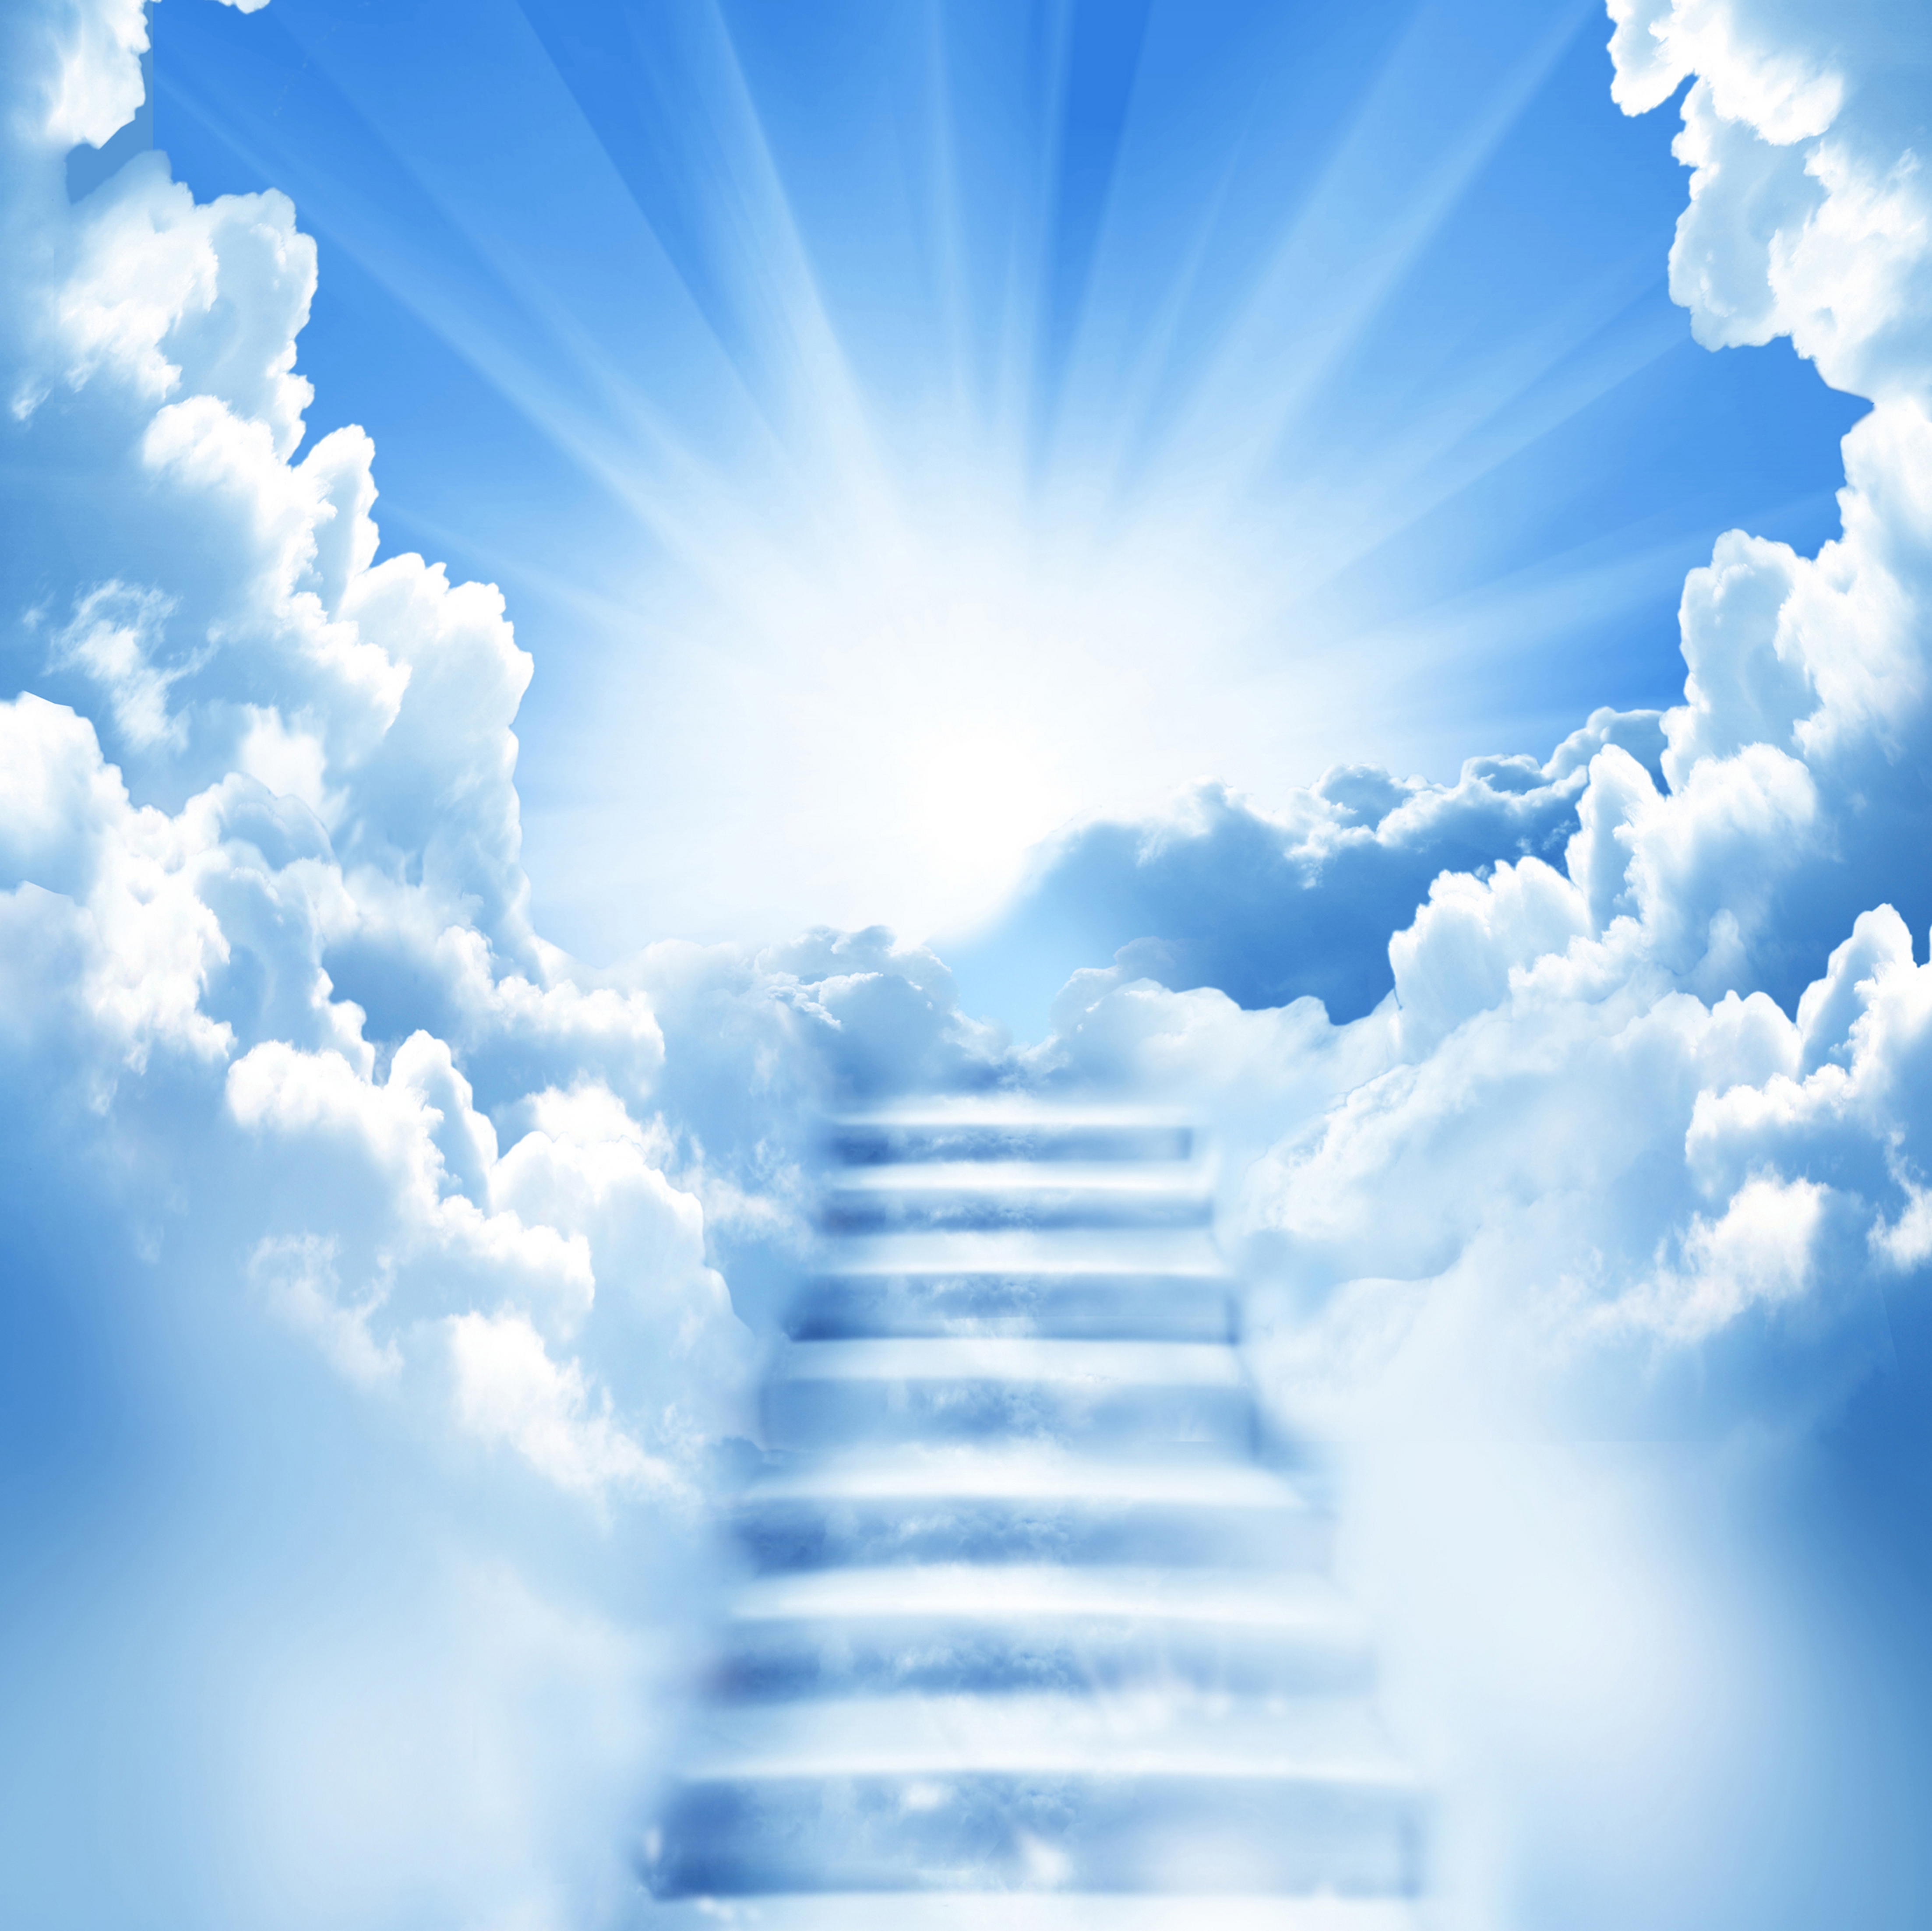 Stairway To Heaven Wallpapers